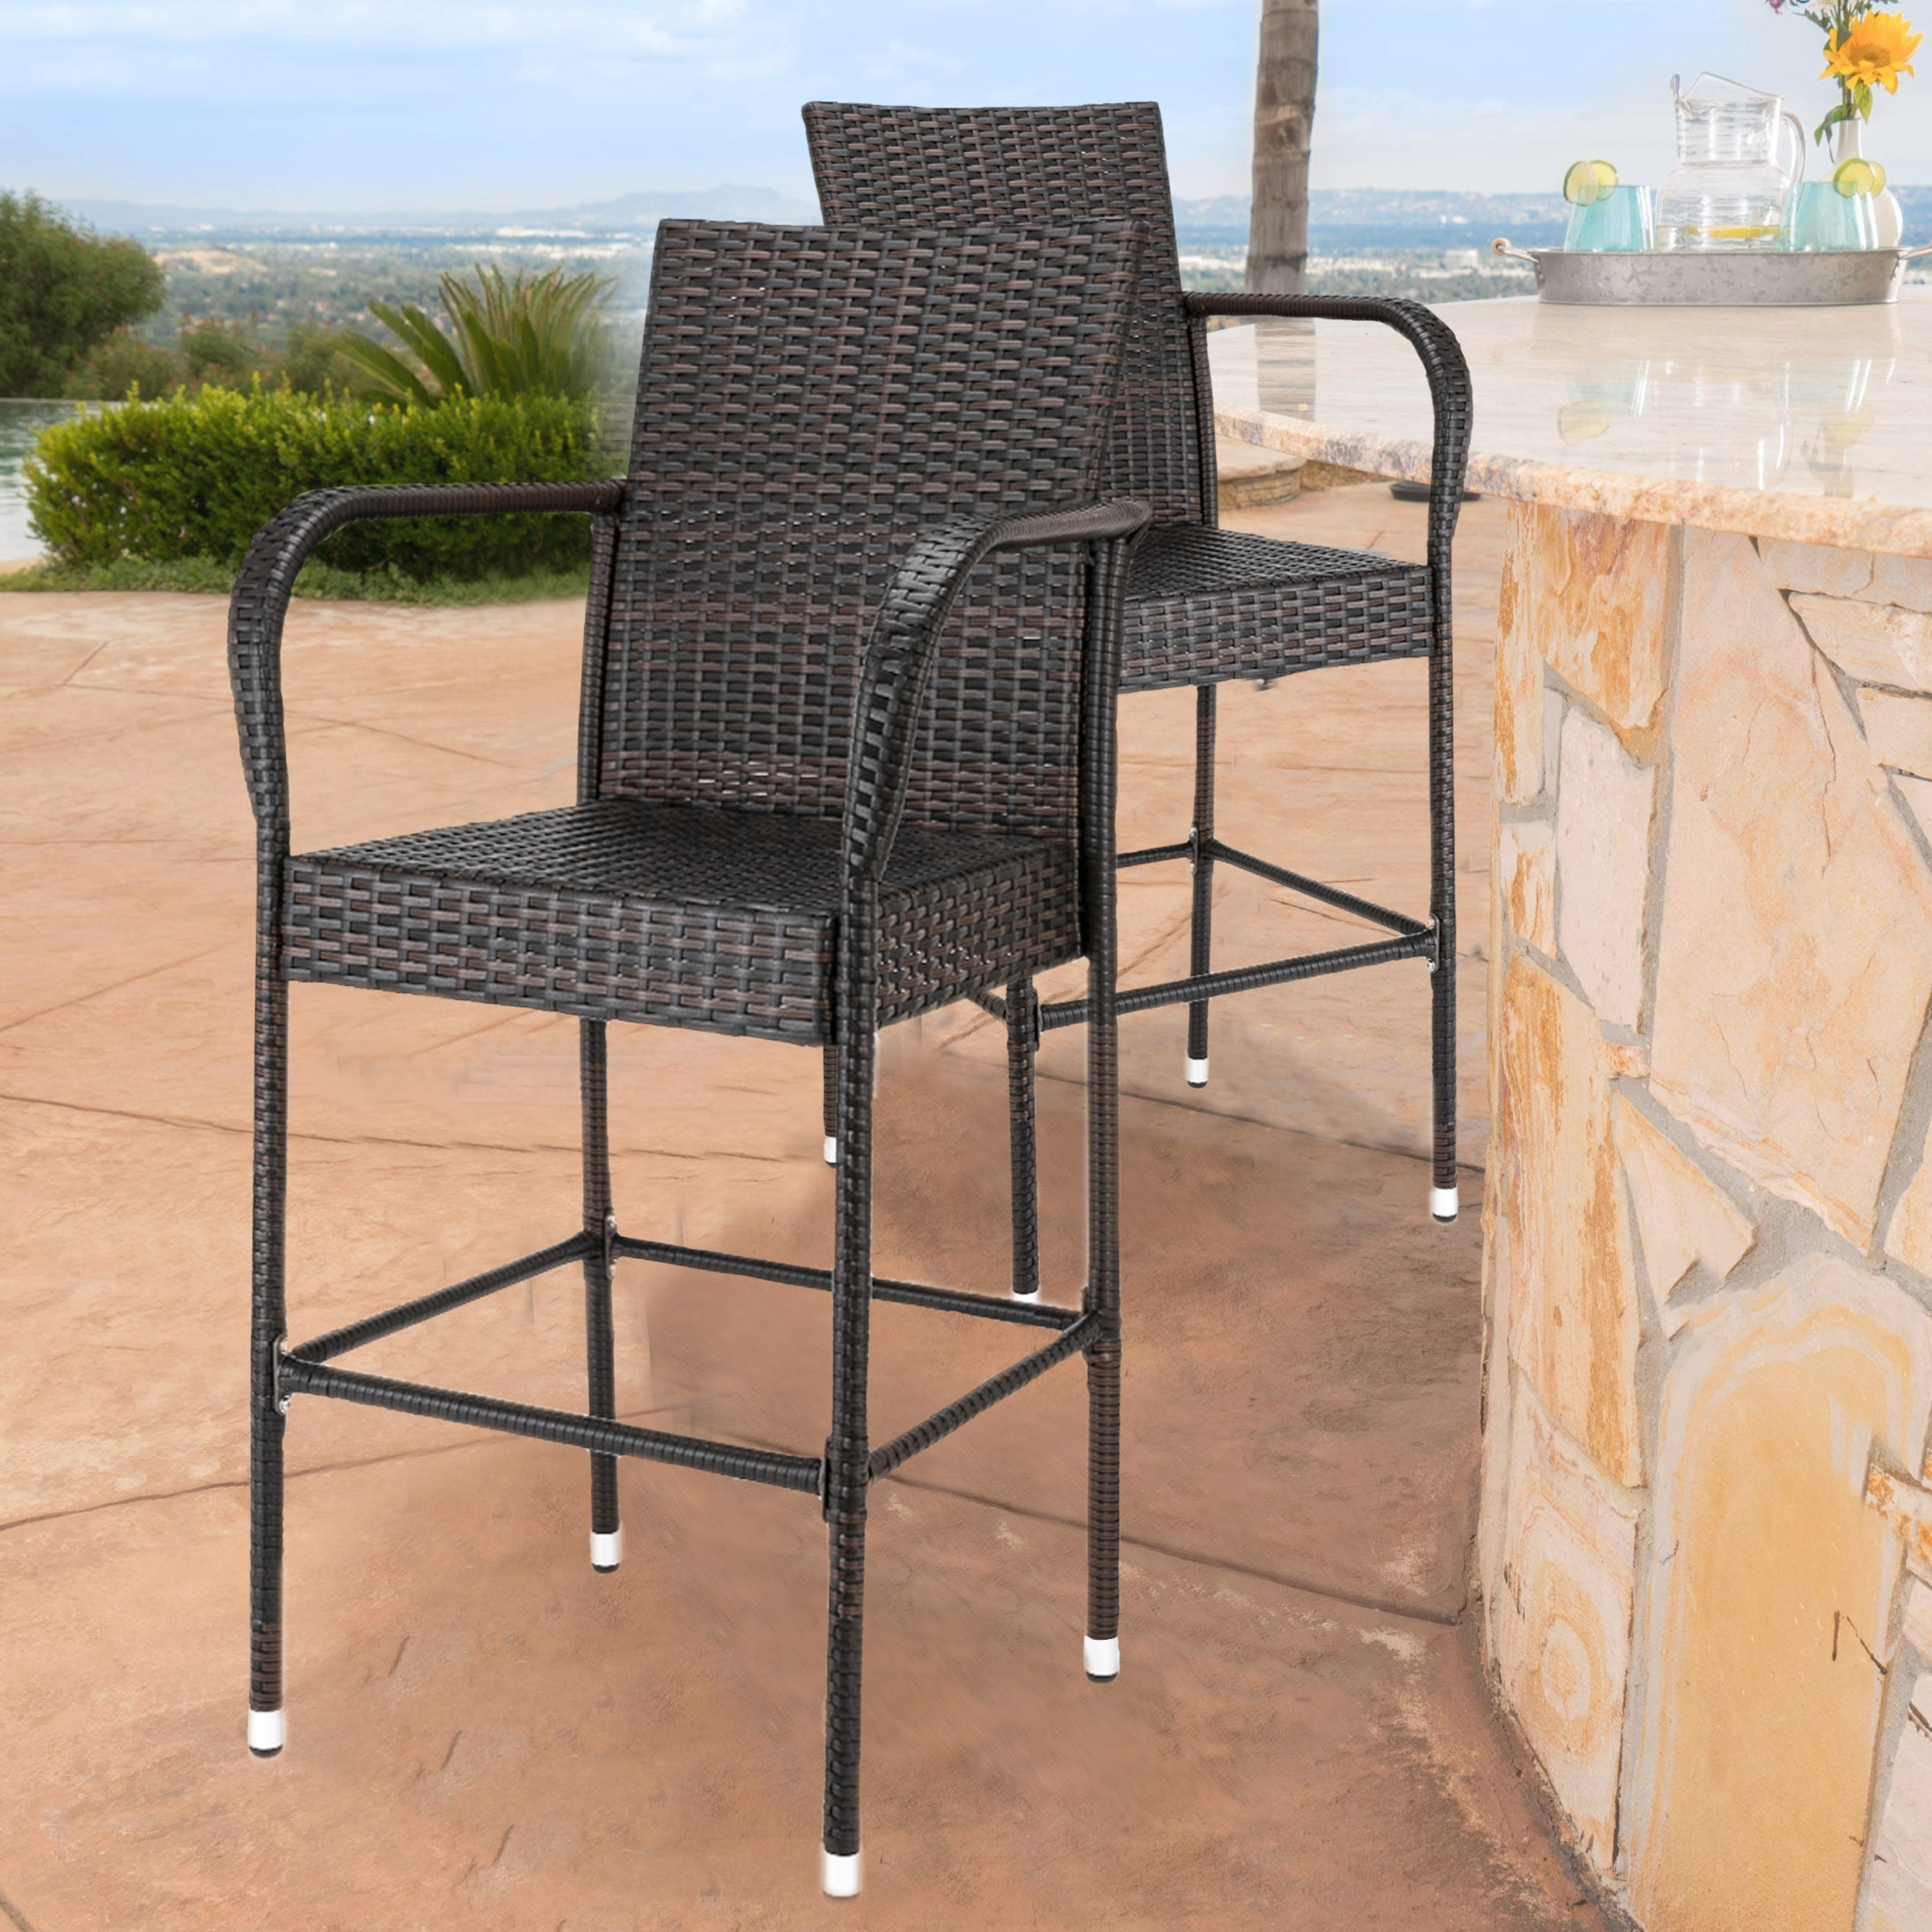 Outdoor Bar Stools 24 inches High, Outdoor Patio Furniture Wicker Rattan Bar Stool with Armrest and Footrest, Patio Bar Chairs for Garden Pool Lawn Backyard, Bar Stools with Back Sets of 2, W2109 - image 5 of 11